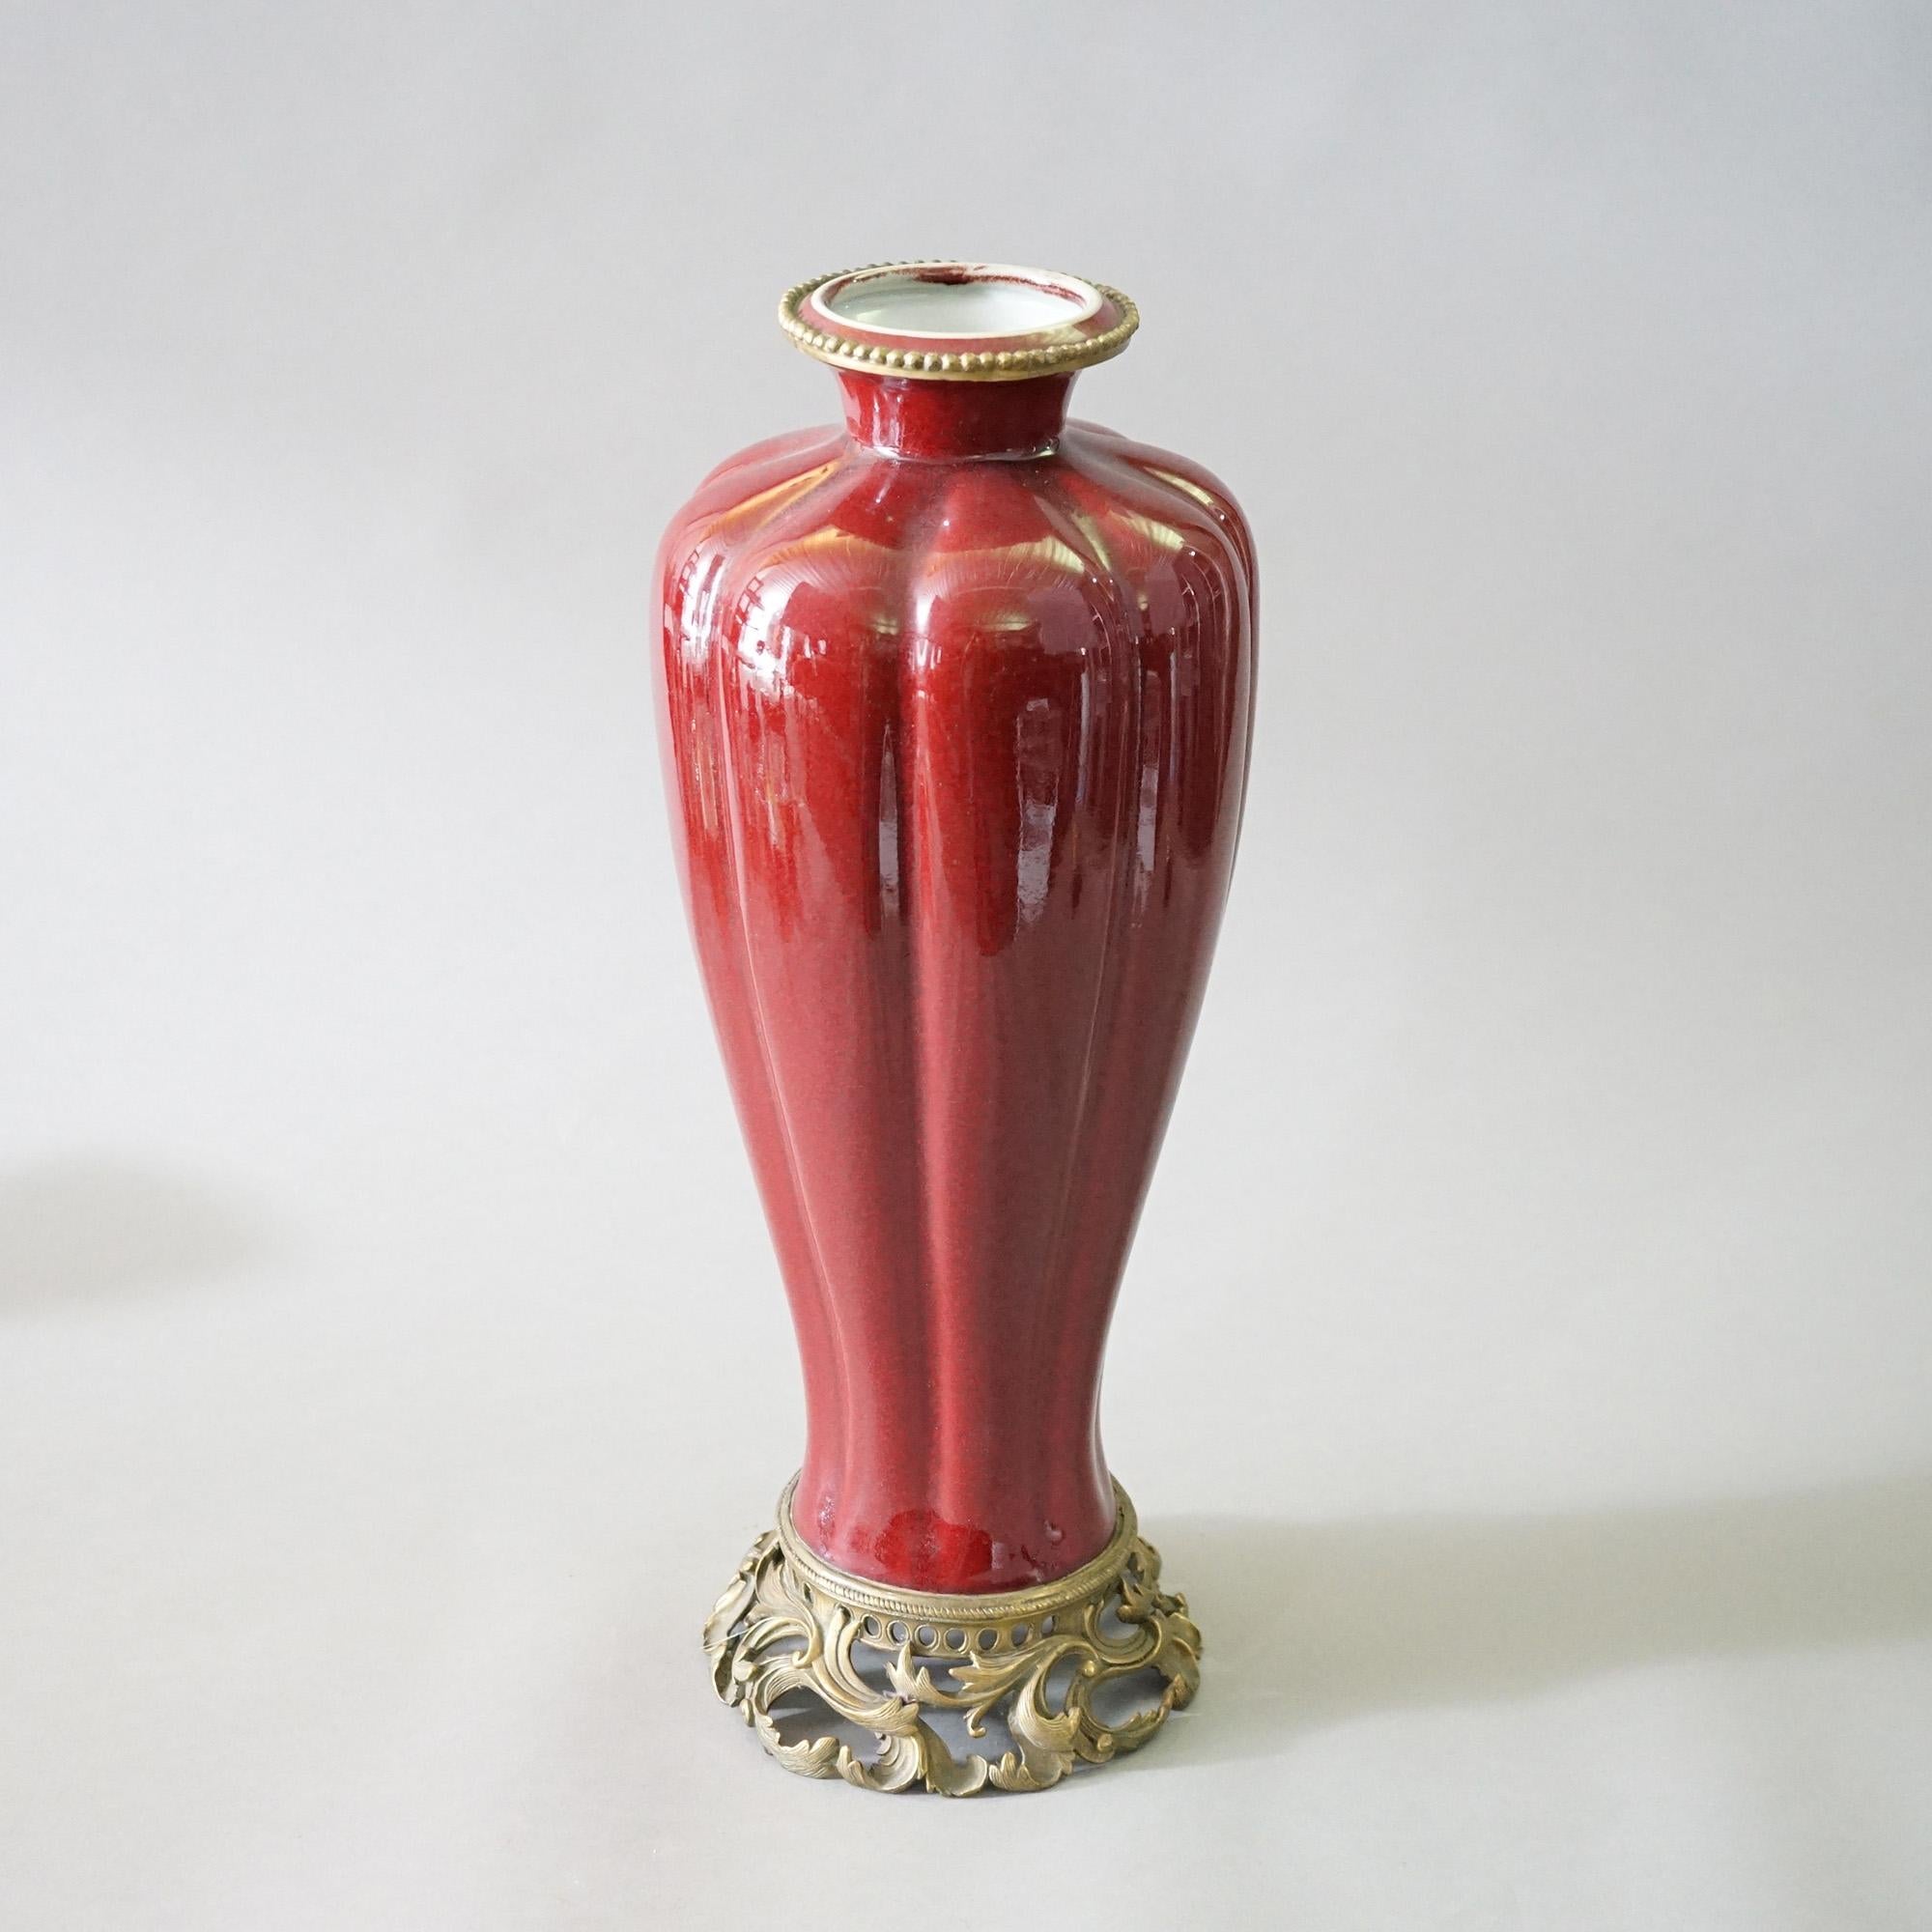 A Chinese porcelain vase offers porcelain construction in vermillion red glaze with foliate cast bronze mounts, 20th century

Measures- 20.75''H x 7.75''W x 7.75''D.

Catalogue Note: Ask about DISCOUNTED DELIVERY RATES available to most regions